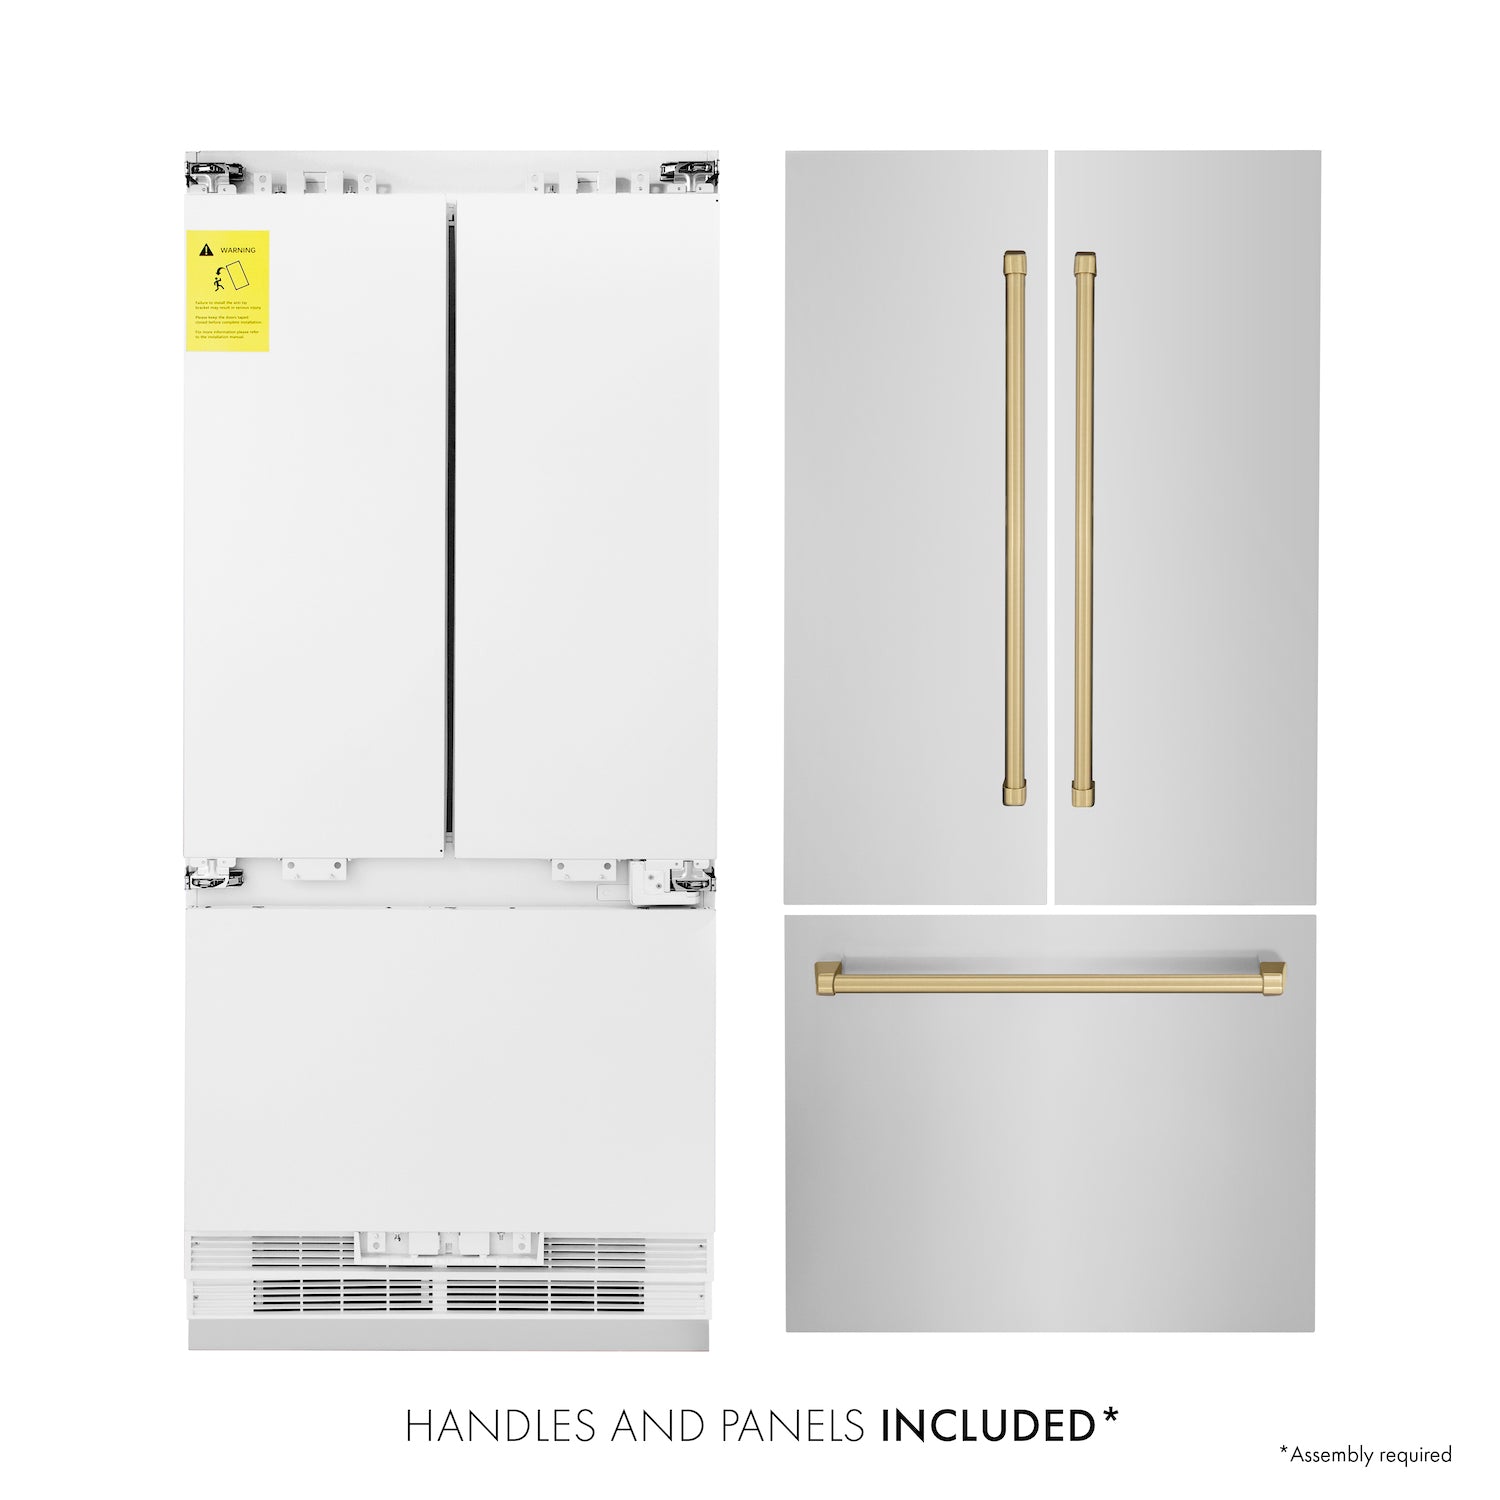 ZLINE Autograph Edition 36 in. 19.6 cu. ft. Built-in 2-Door Bottom Freezer Refrigerator with Internal Water and Ice Dispenser in Stainless Steel with Champagne Bronze Accents (RBIVZ-304-36-CB) front, refrigeration unit, panels, and handles separated .